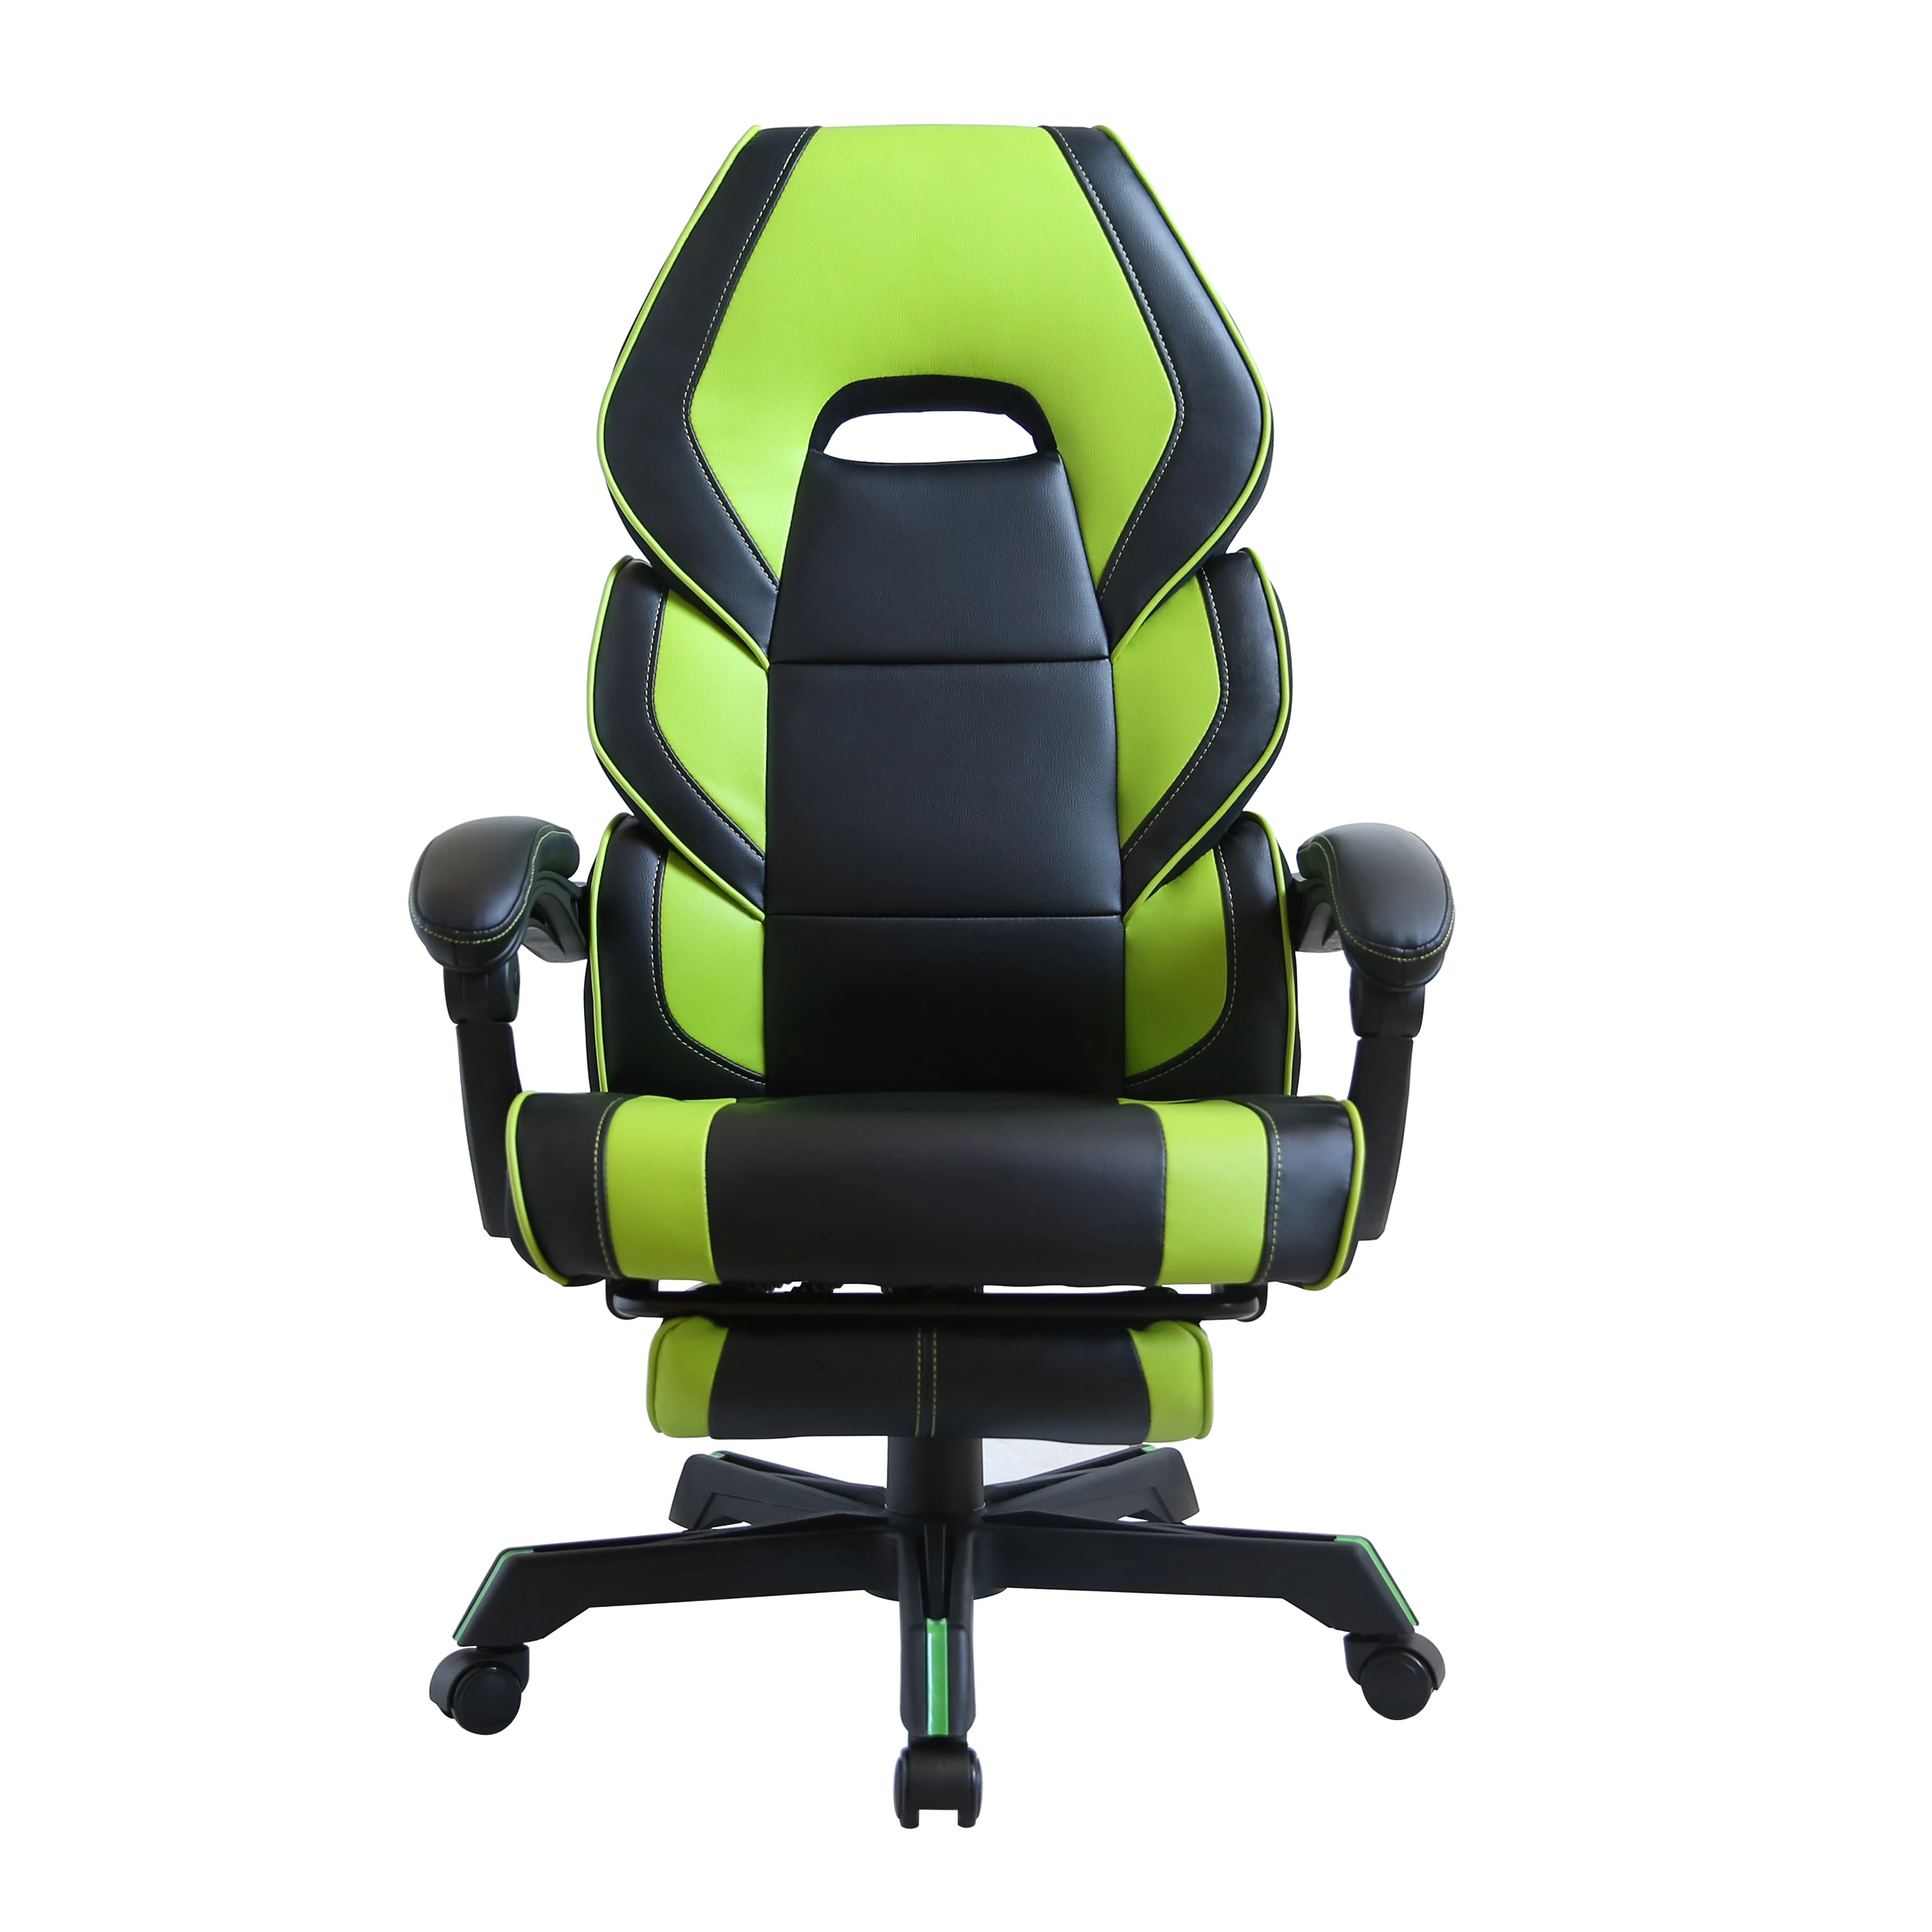 Office Chair High Back PU Chair, Extreme Gaming Chair, Office Gaming Chair for Gamer внешняя плата видеозахвата avermedia live gamer extreme 3 gc551g2